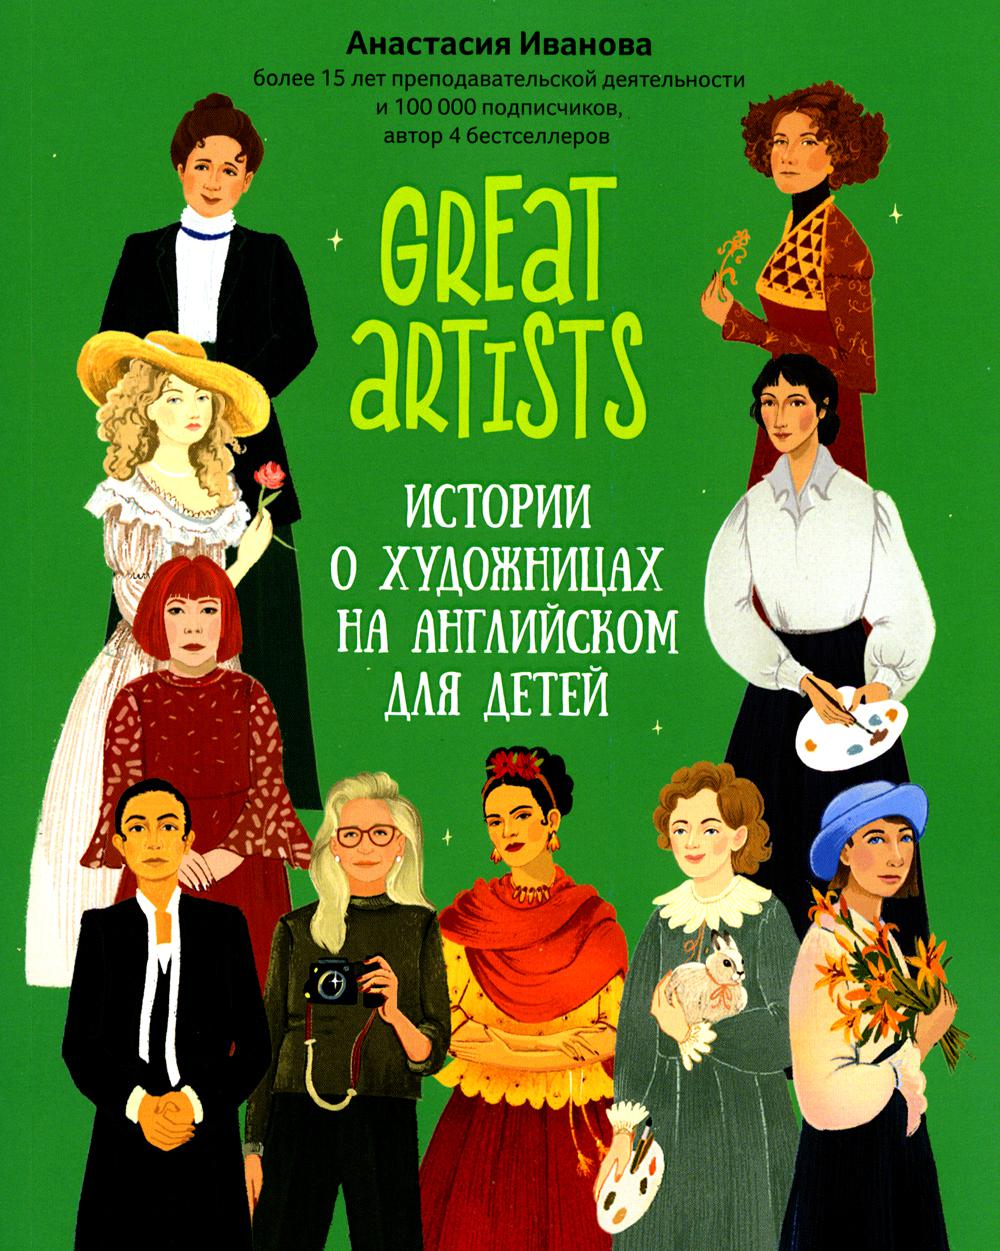 Great artists:        